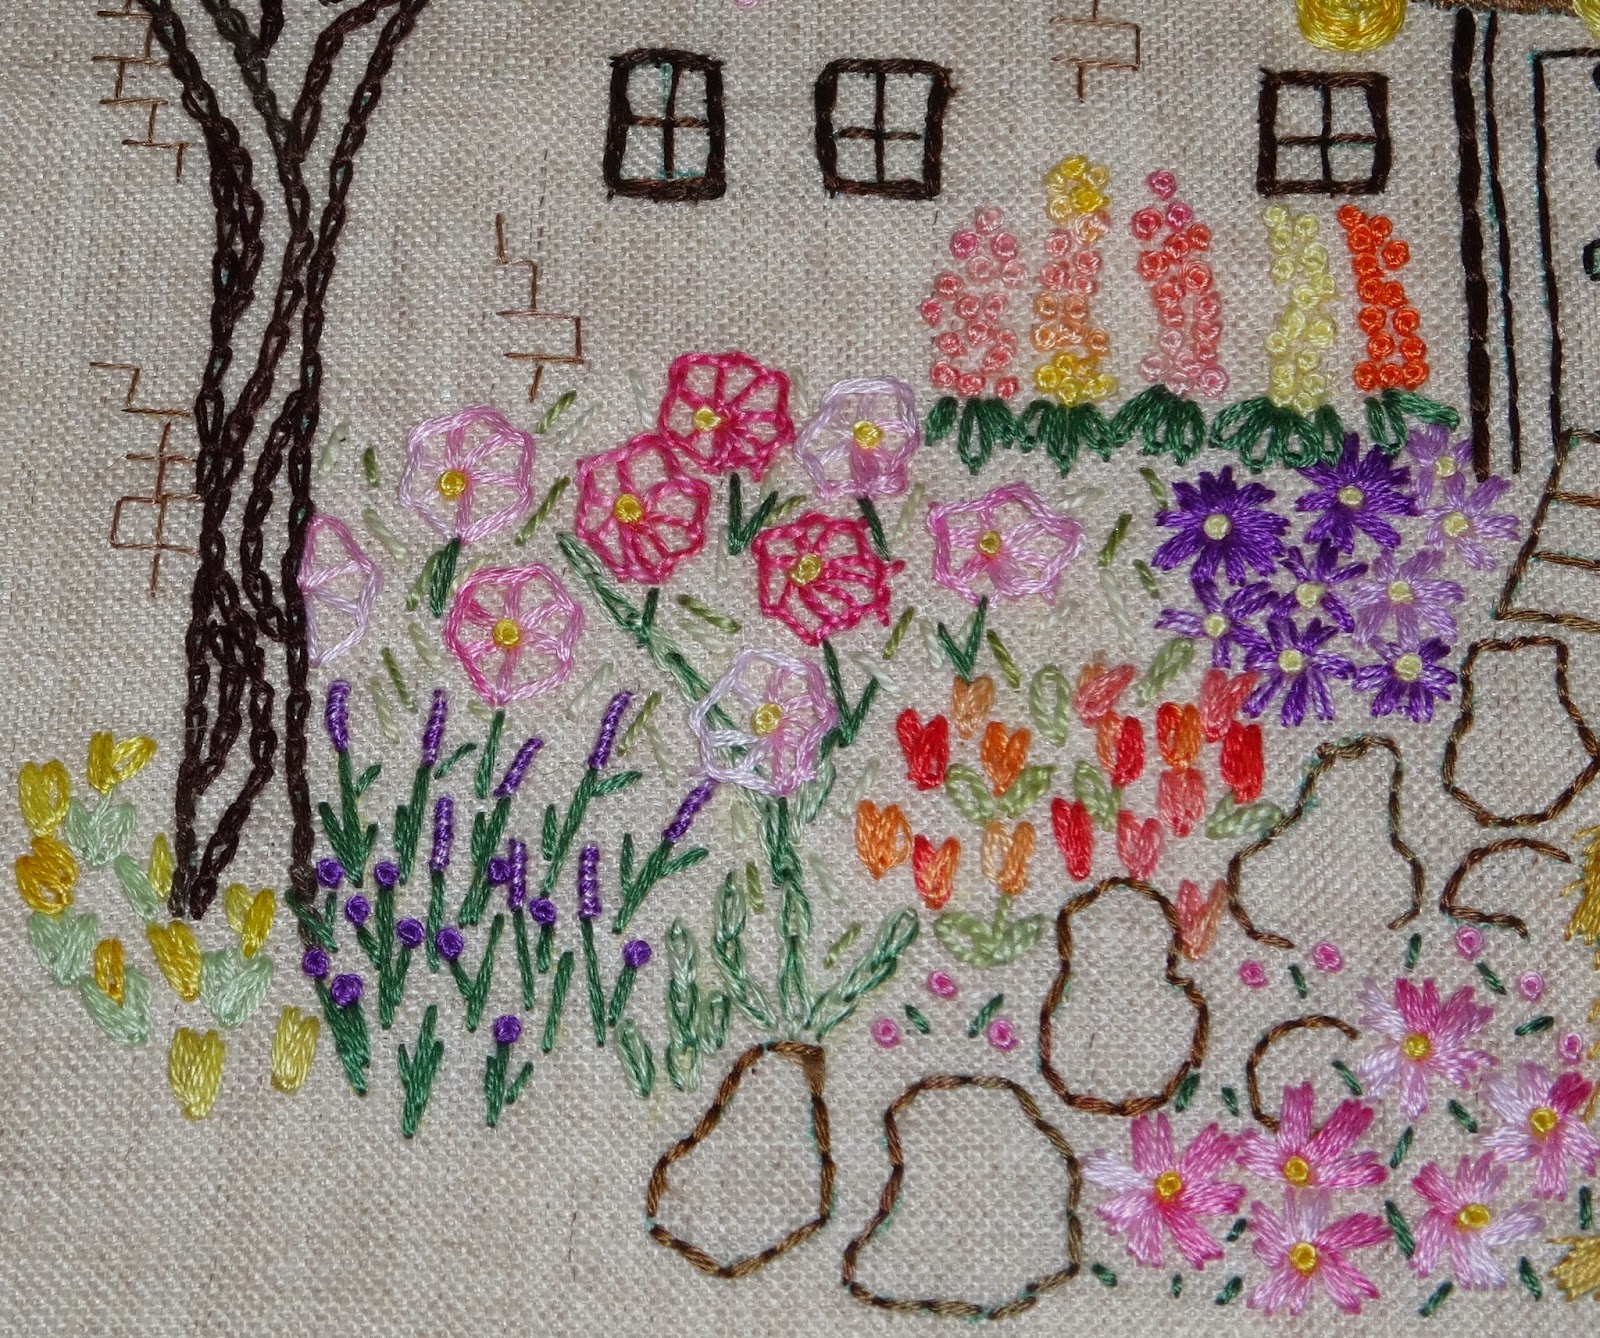 embroidery cottage garden stitches cupboard emily 1930 colours bright much simple had using fun these so